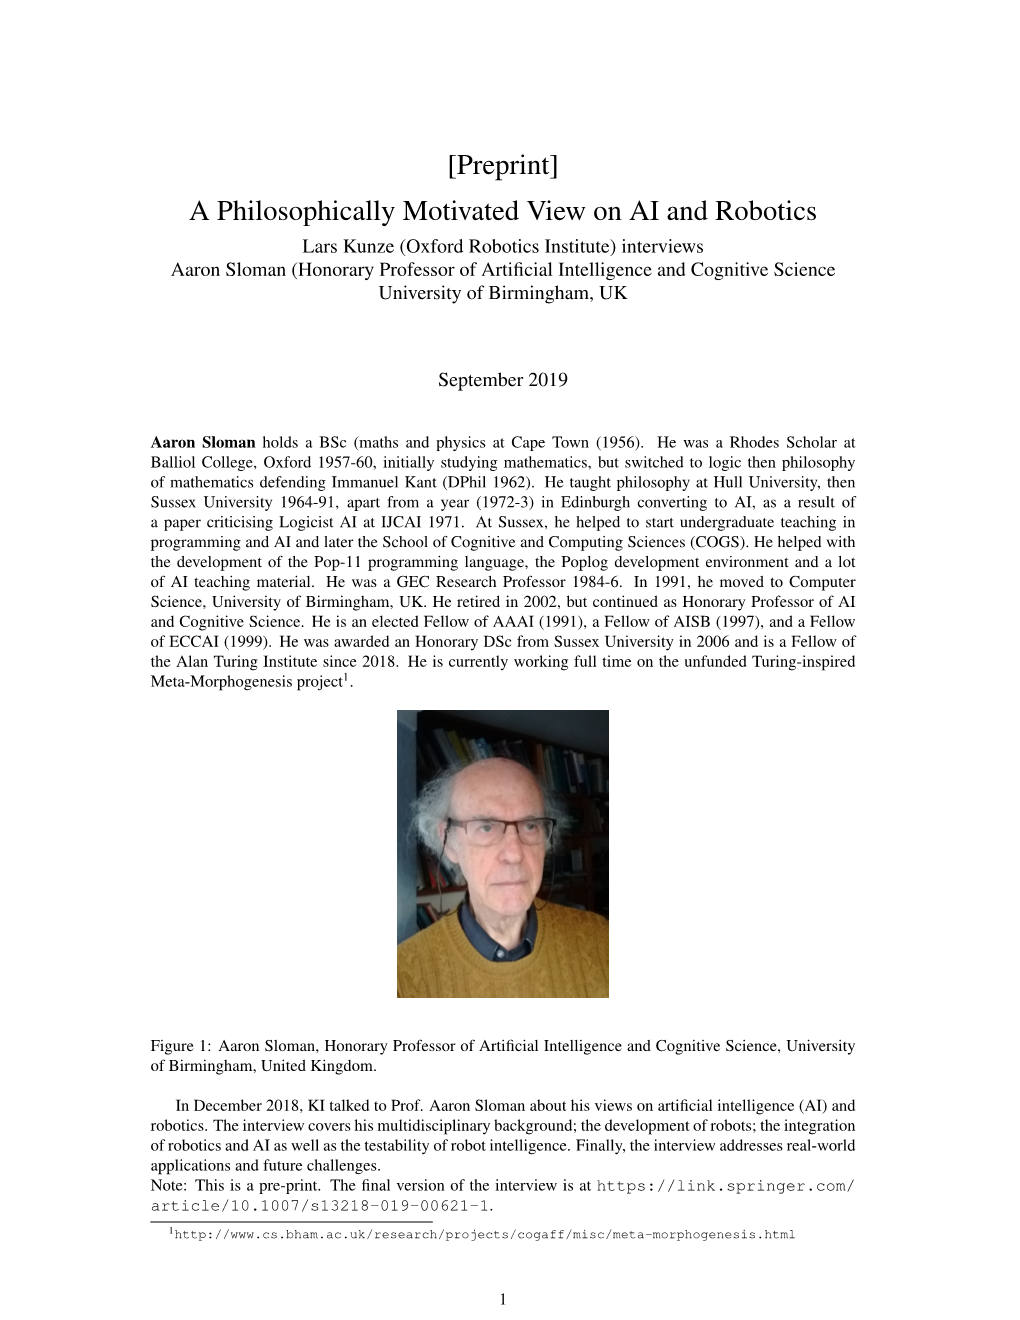 [Preprint] a Philosophically Motivated View on AI and Robotics